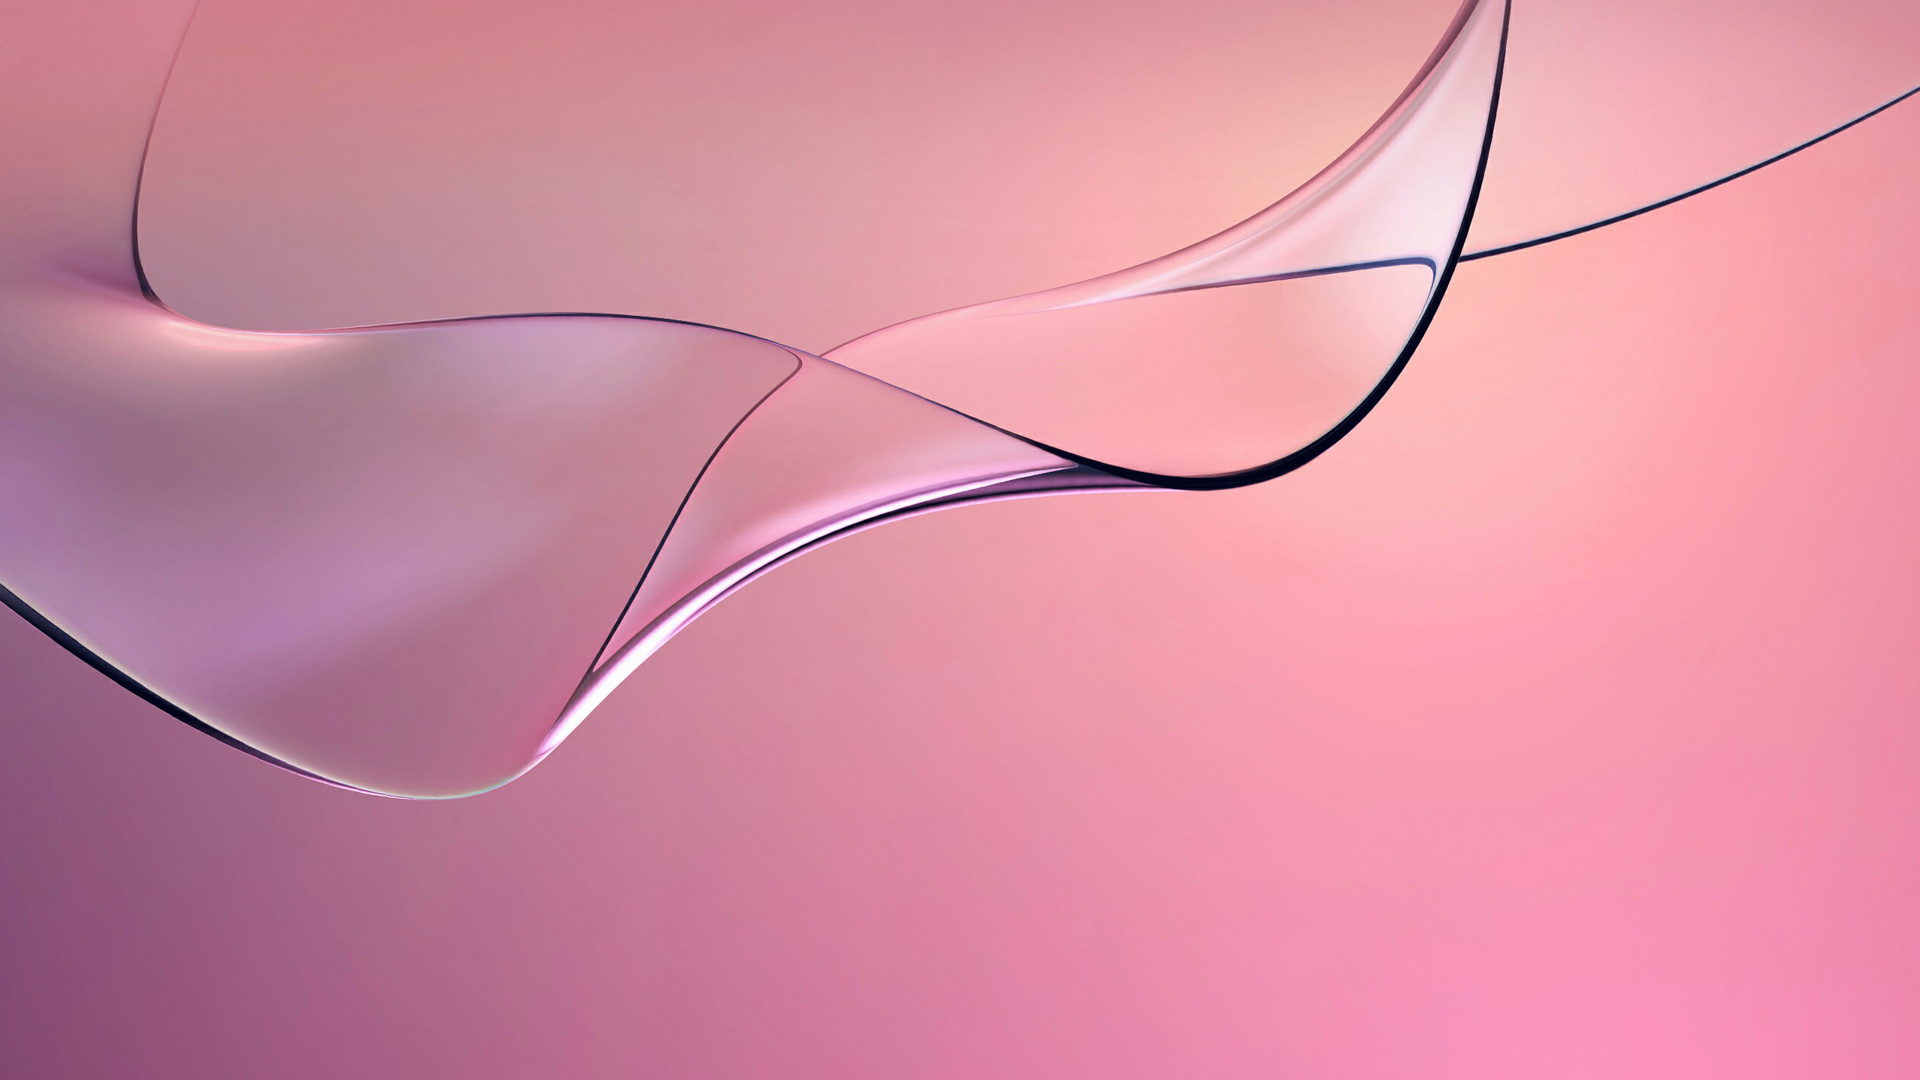 White Coated Wire on Pink Textile. Wallpaper in 1920x1080 Resolution